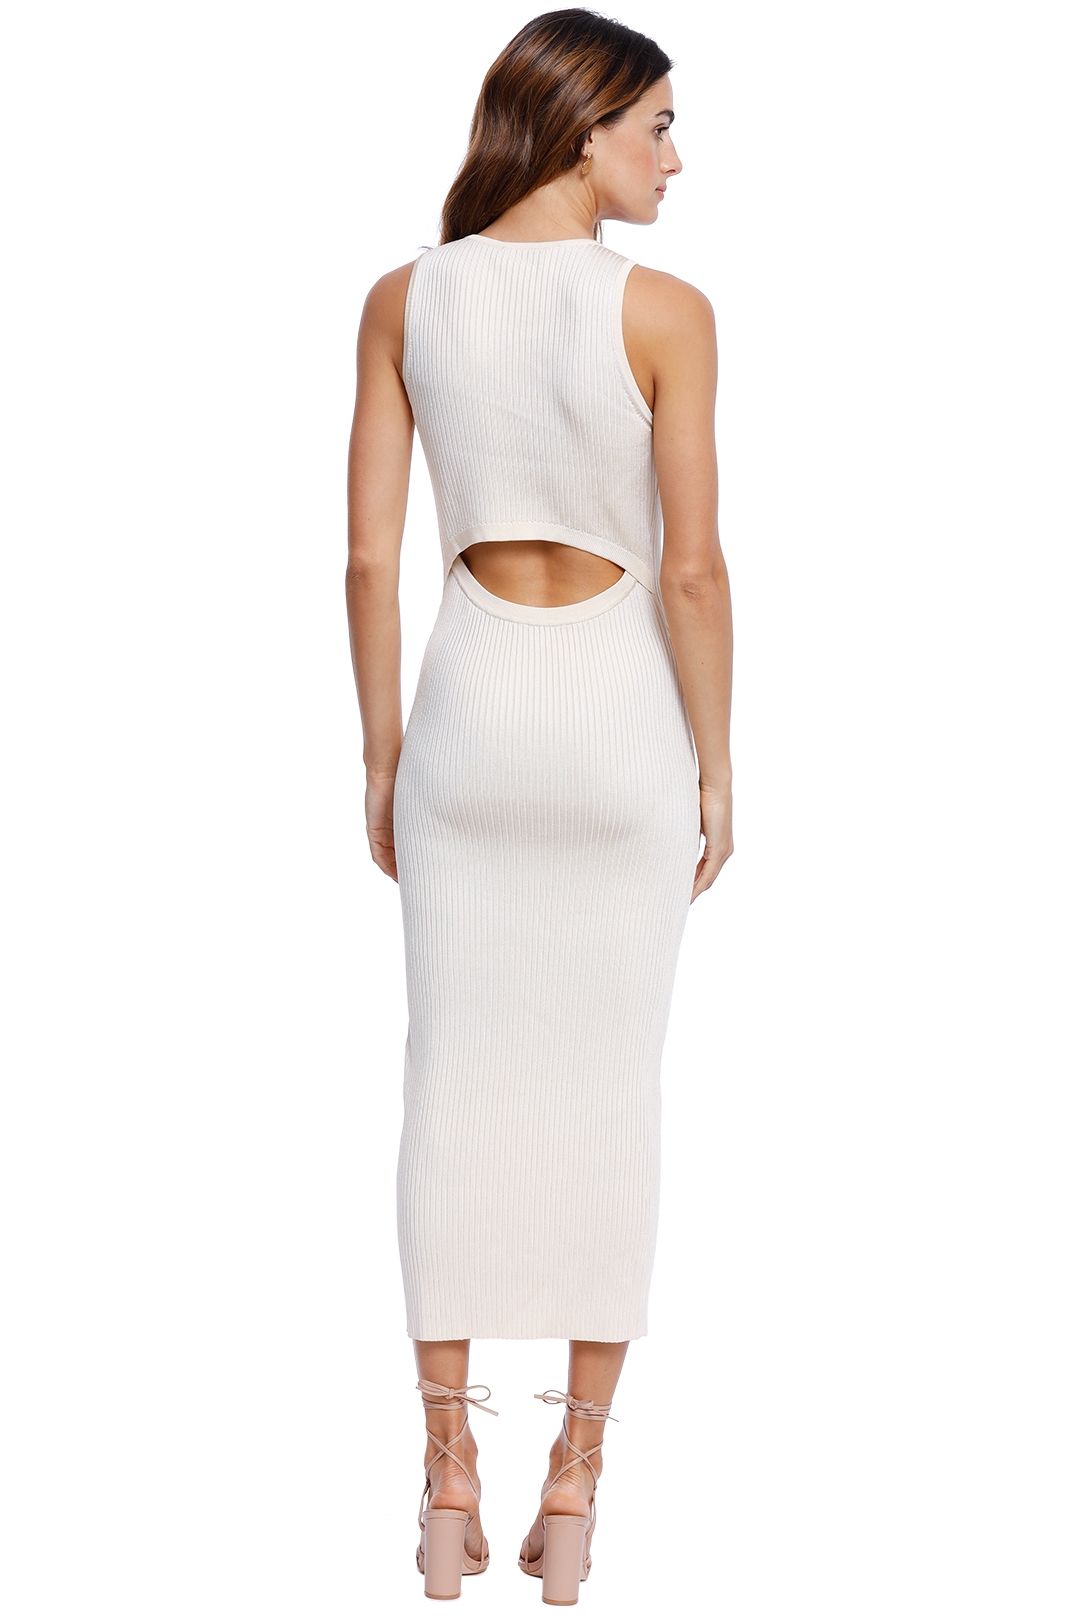 Significant Other Sofia Knit Dress Cream cutout